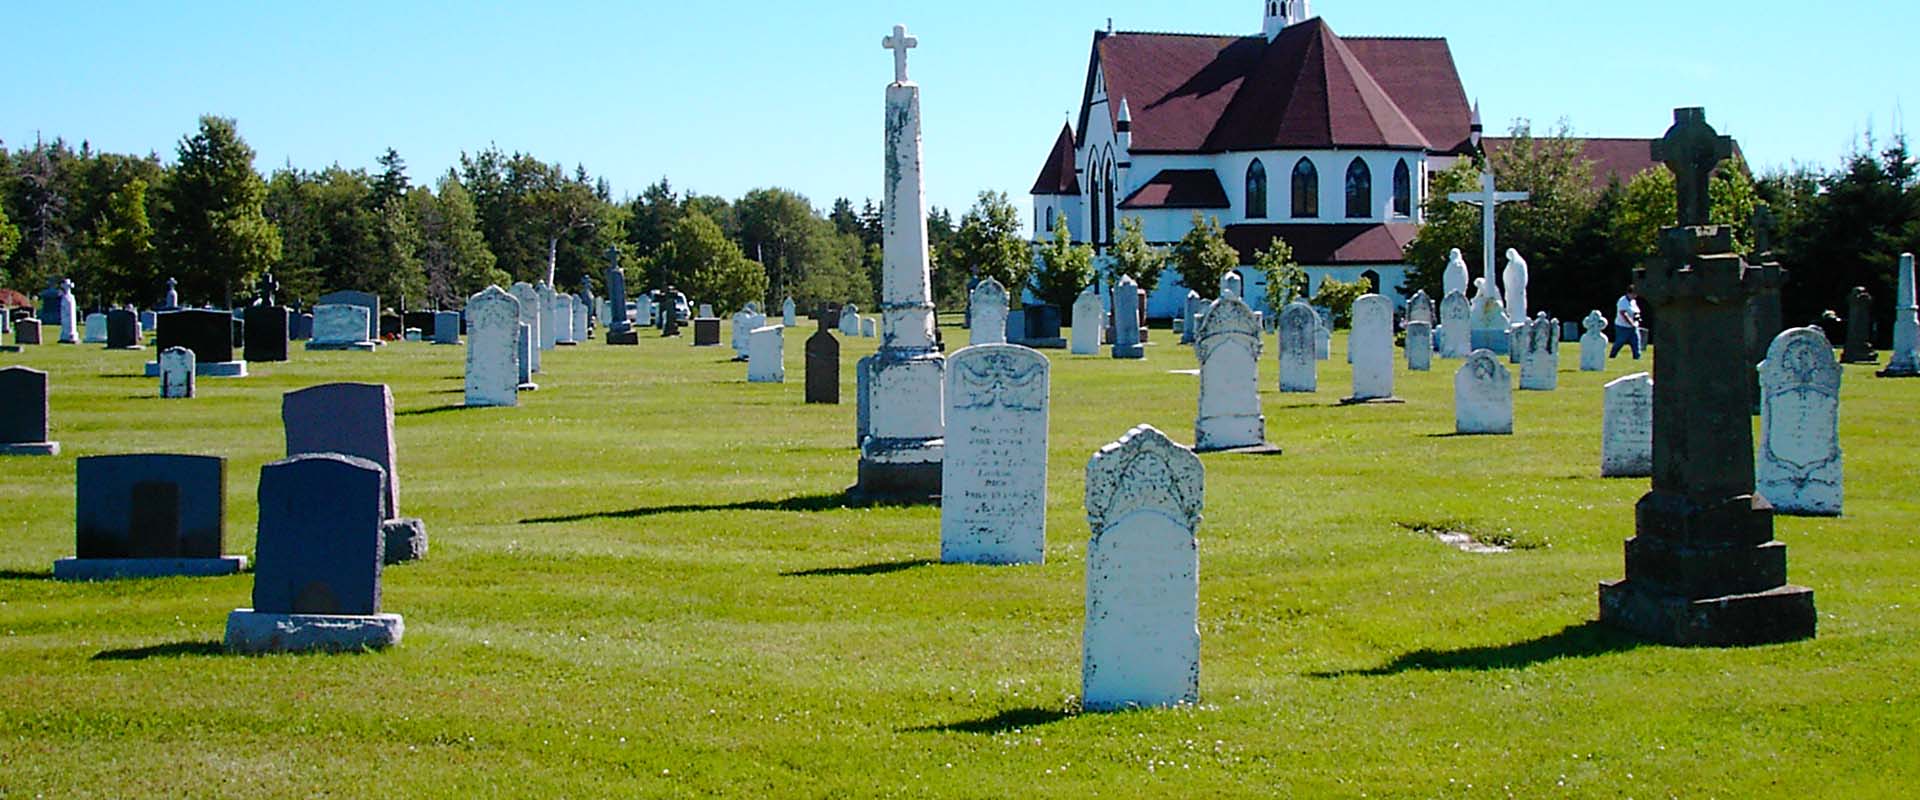 A view of headstones located to the side and rear of a wooden country church. The image displays the cemetery and church of St. Mary's Roman catholic parish in Indian River, Prince Edward Island.